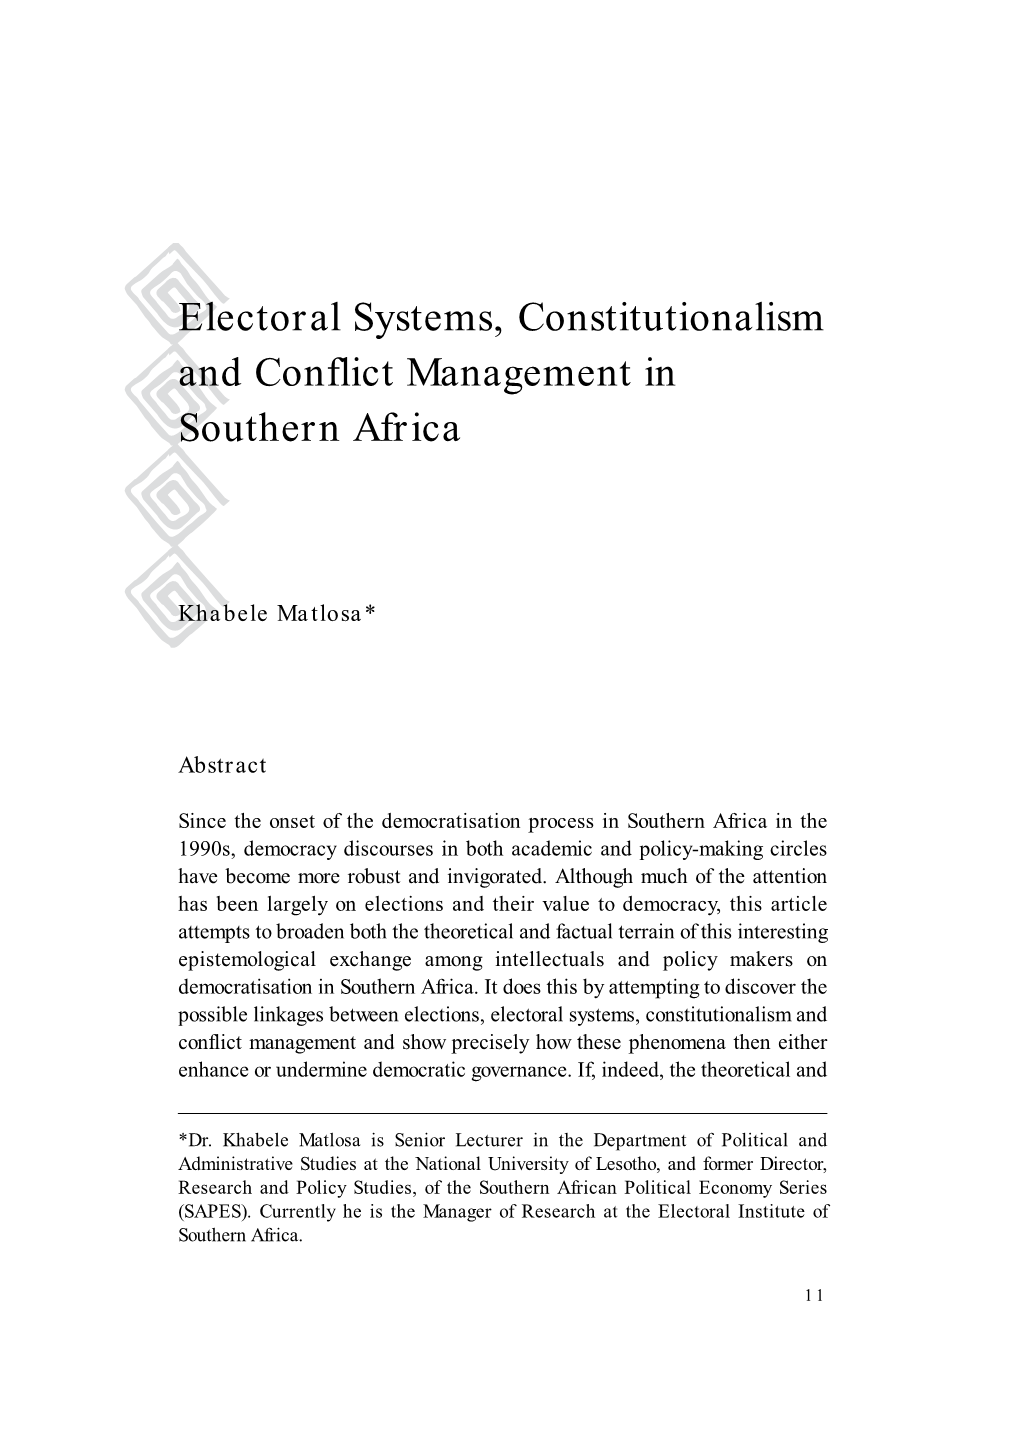 Electoral Systems, Constitutionalism and Conflict Management in Southern Africa